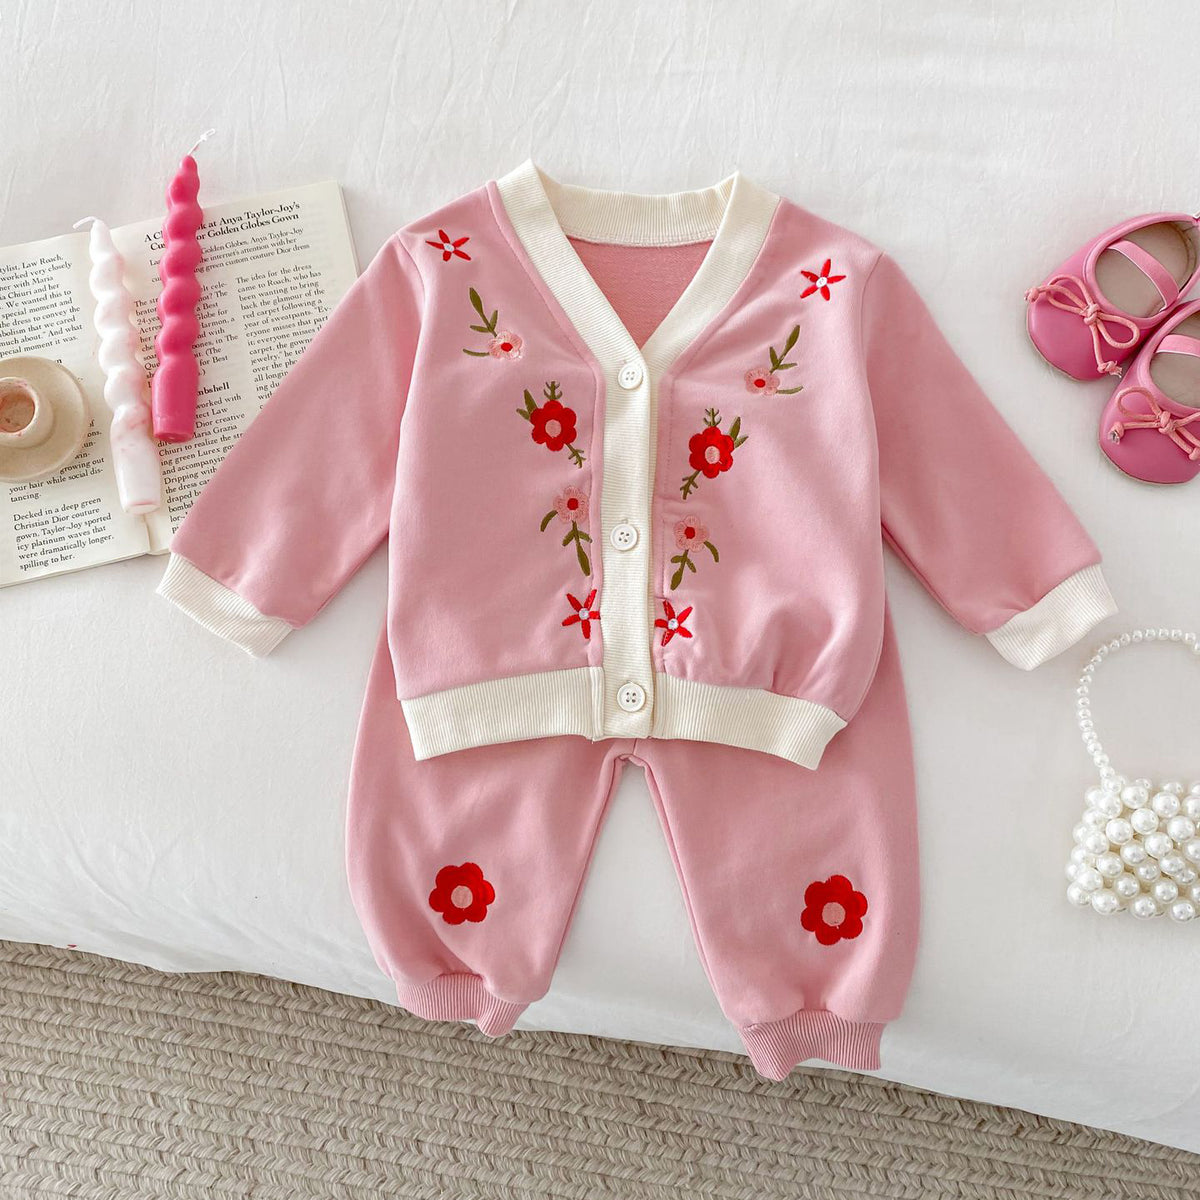 2 Pieces Set Baby Girls Embroidered Tops And Pants Wholesale 24030182